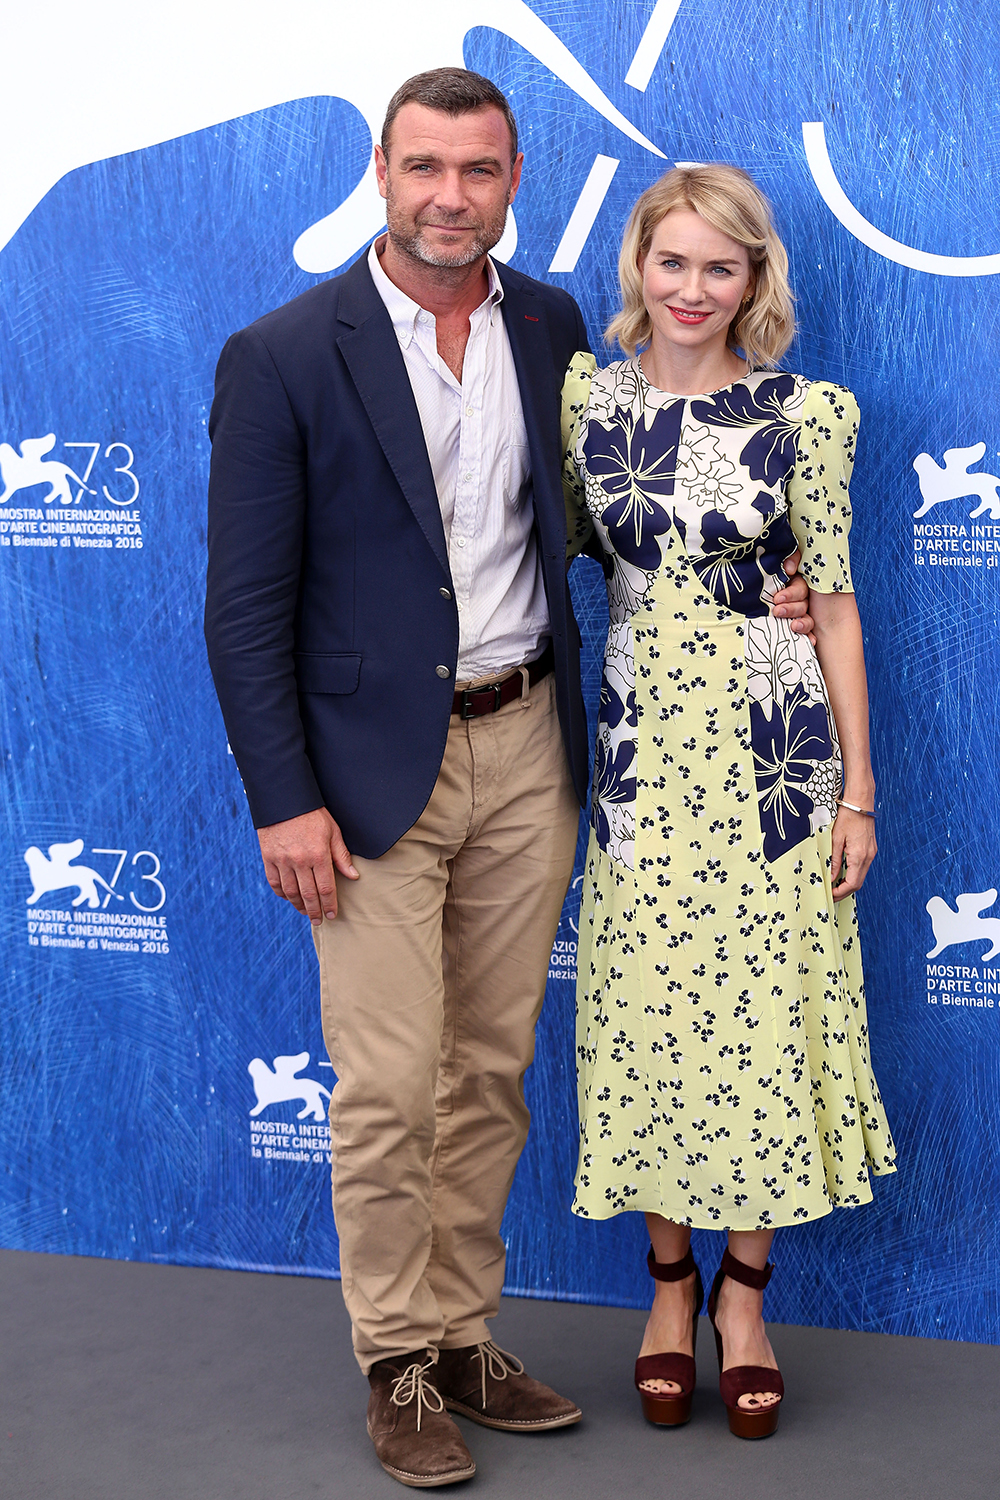 Naomi Watts and Liev Schreiber at photocall for their new film The Bleeder.